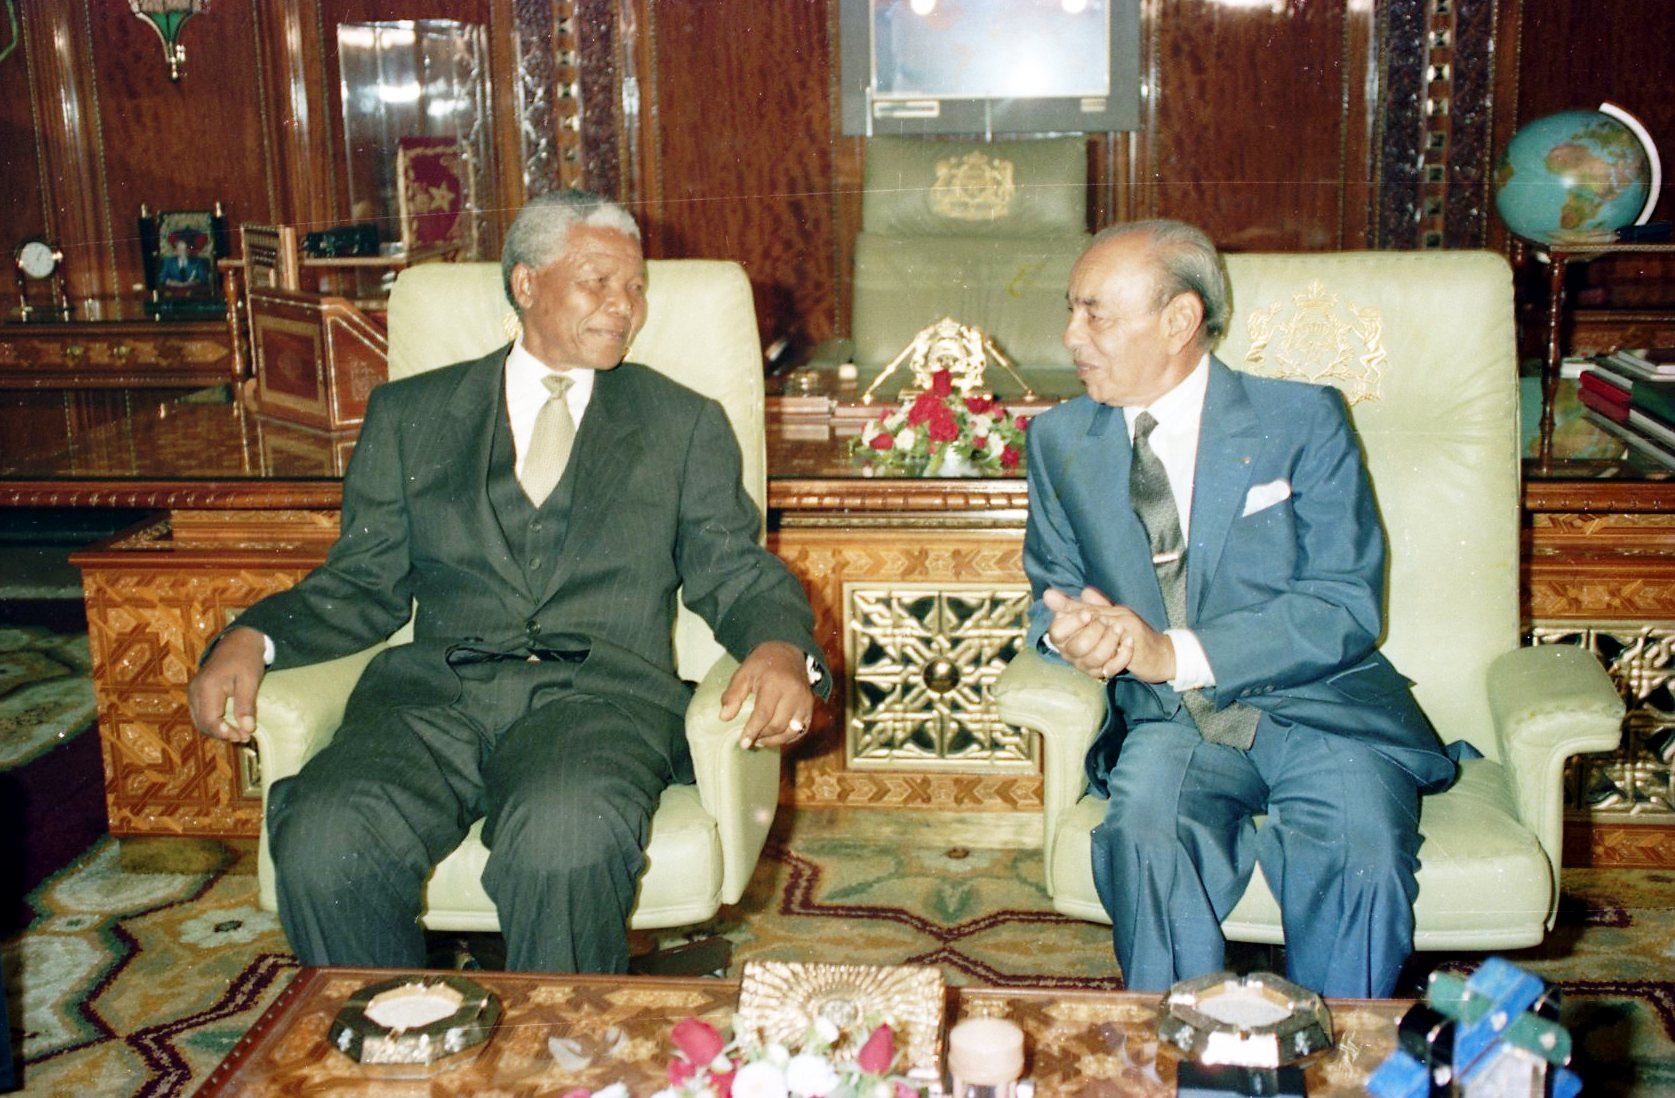 SM Le Roi Hassan II reçoit Le President d Afrique du Sud M.Nelson Mandela, 1994 Image Gallery - Embassy of Morocco in South Africa